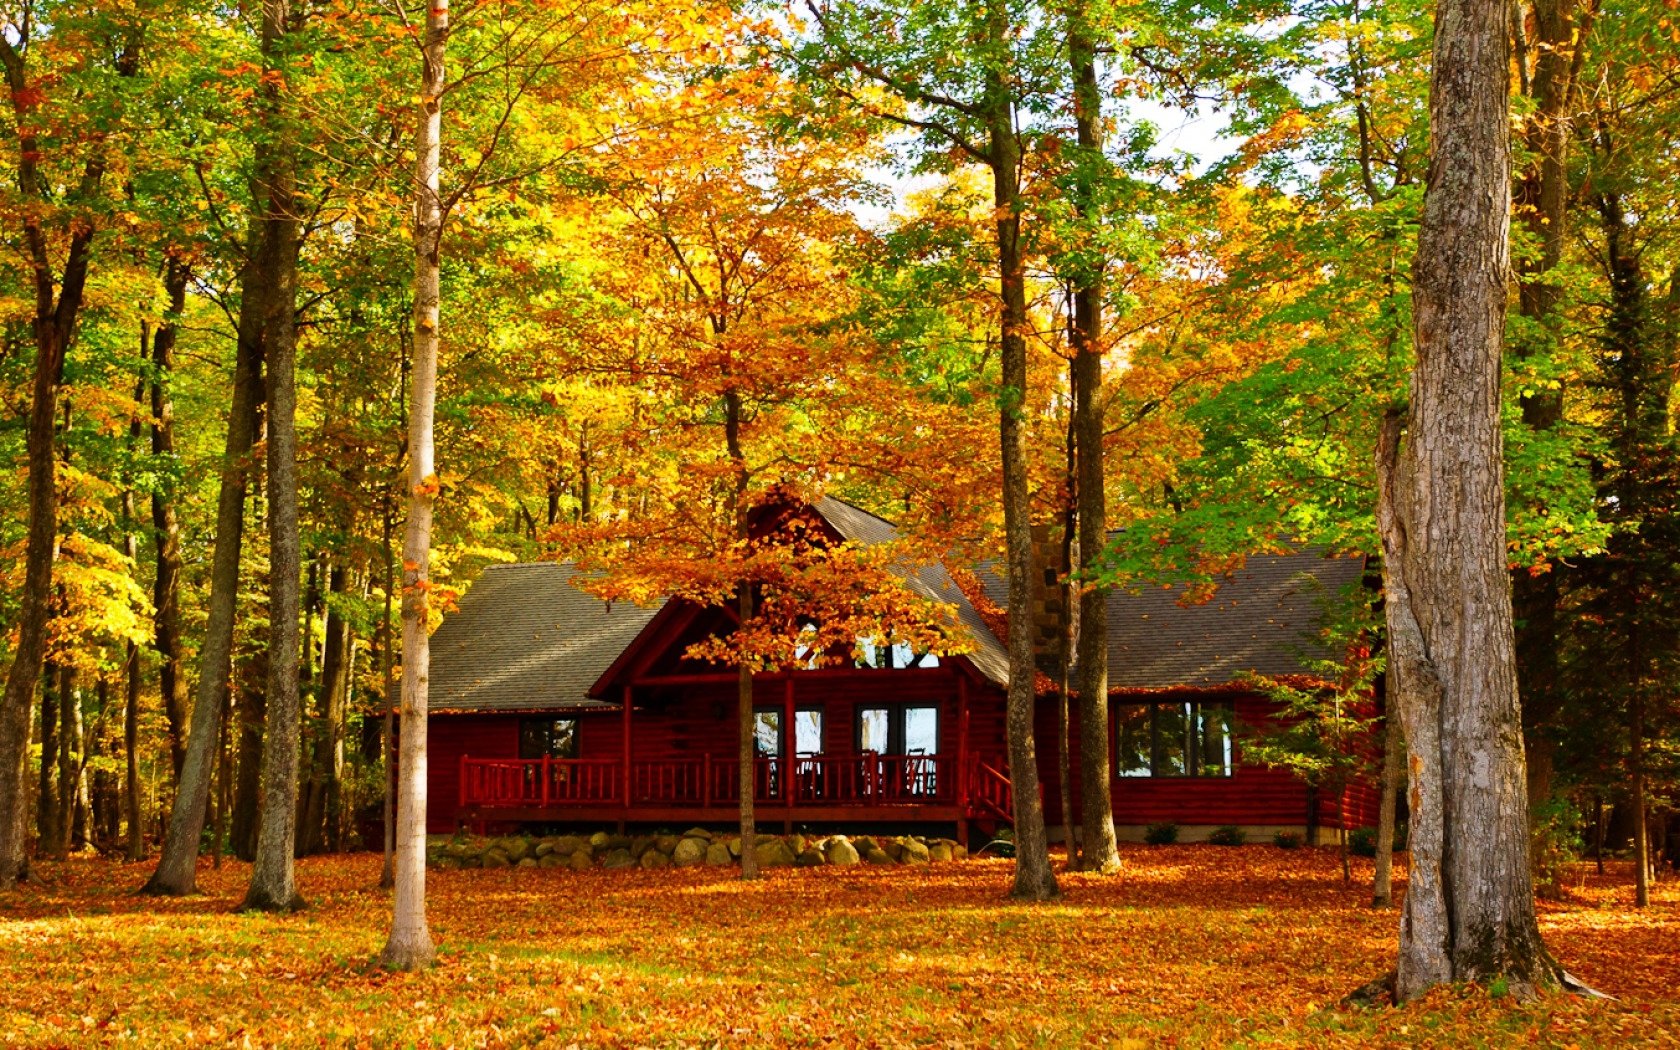 House in Autumn Forest Wallpaper and Background Imagex1050